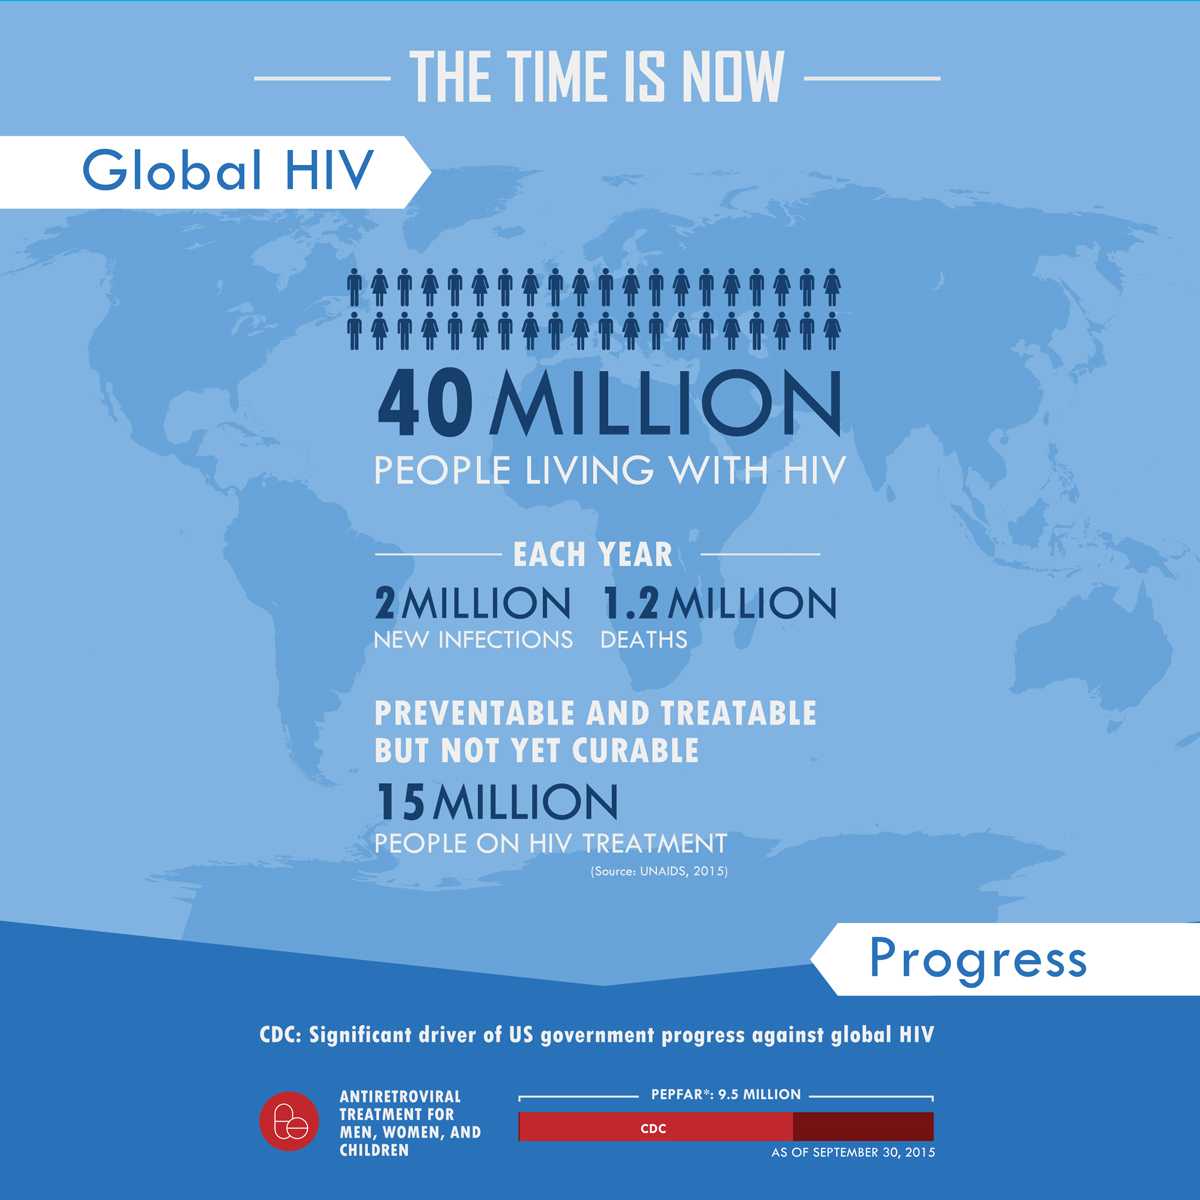 The Time is Now - Global HIV